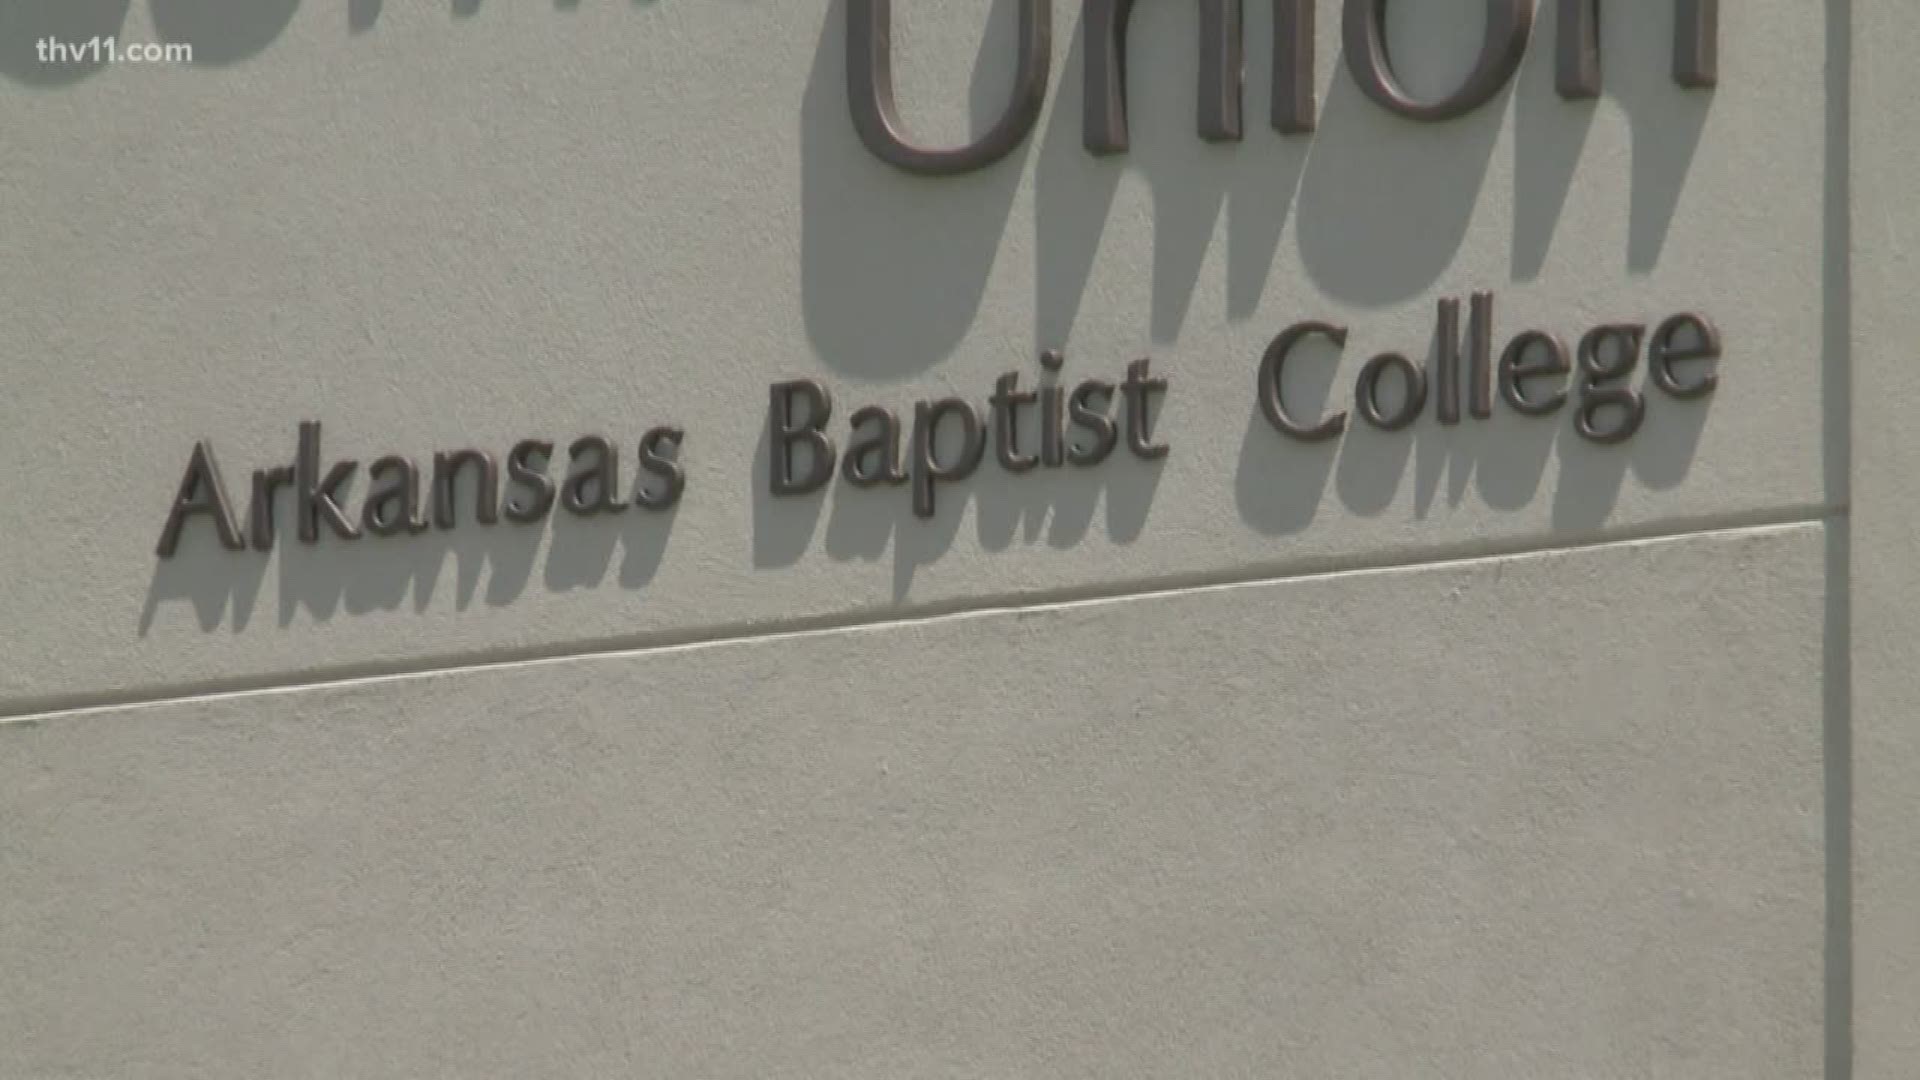 Arkansas Baptist College of Little Rock *should be wrapping up its second academic year of financial stability heading toward the new fall semester.